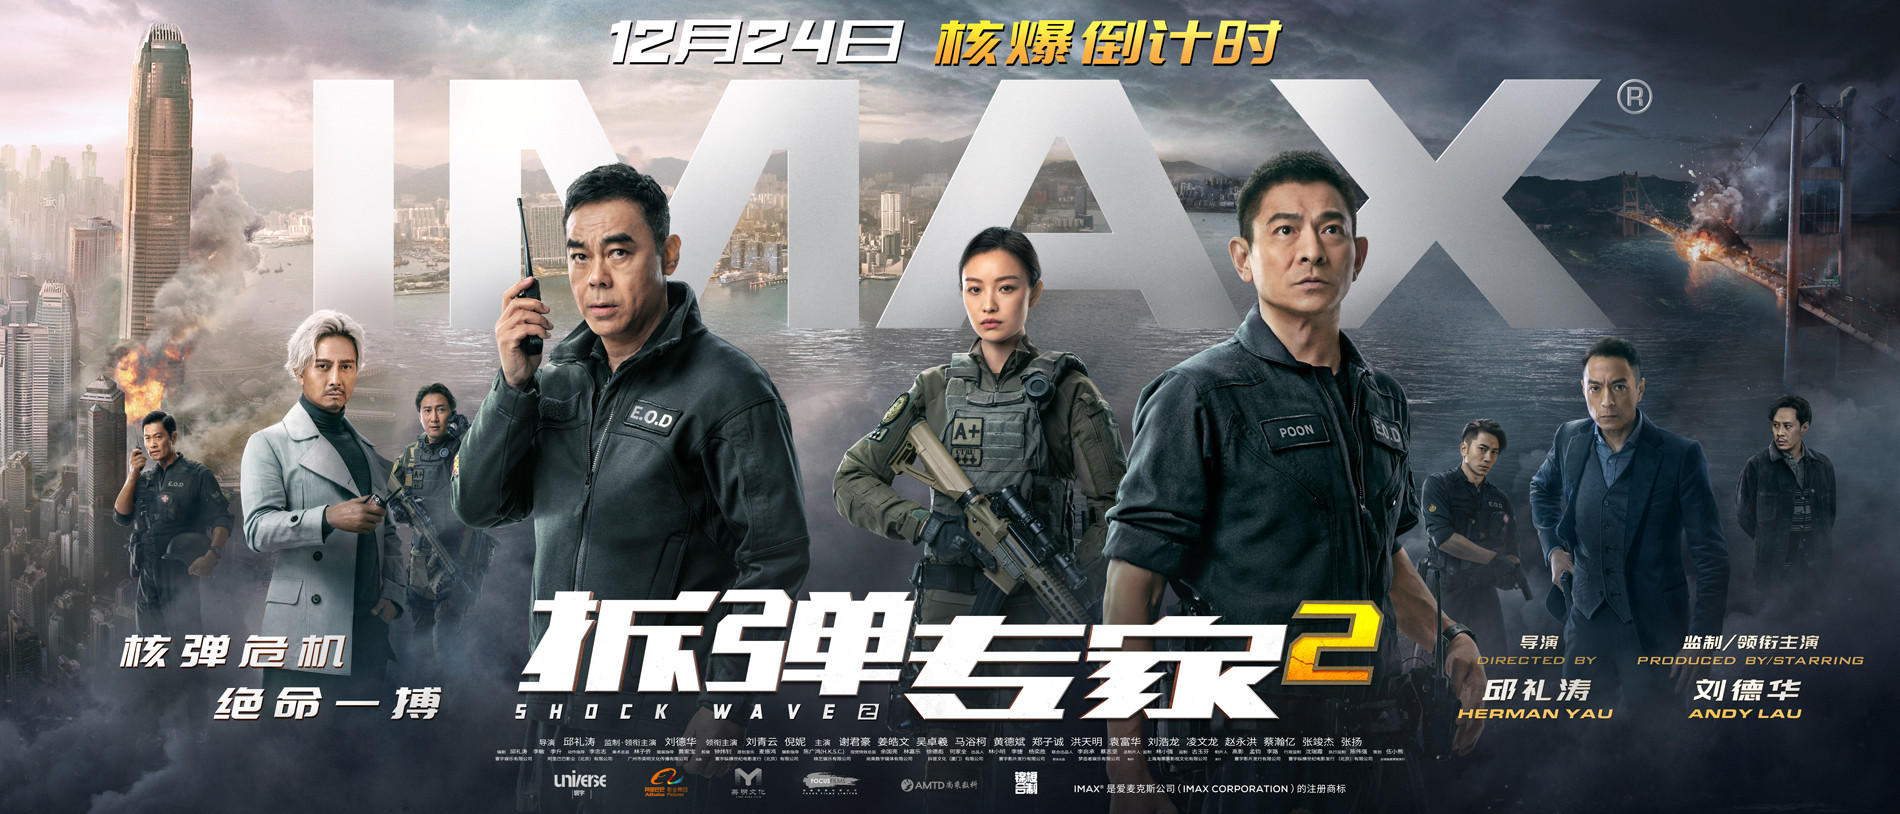 Lyric Andy Lau Believe in Me   相信我 – Theme Song of Shock Wave 2 (2020)